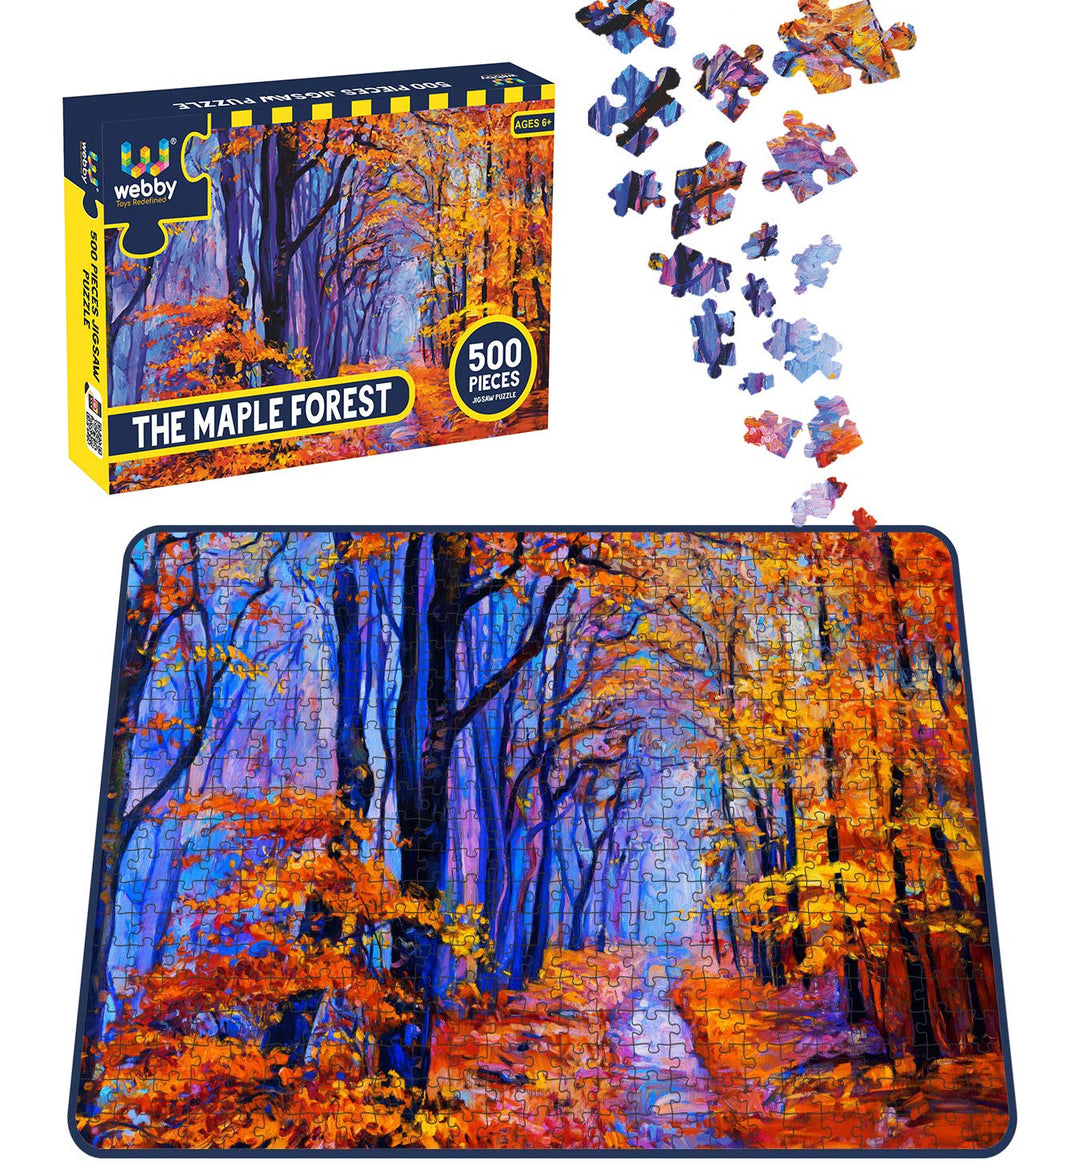 Webby The Maple Forest Wooden Jigsaw Puzzle, 500 pieces